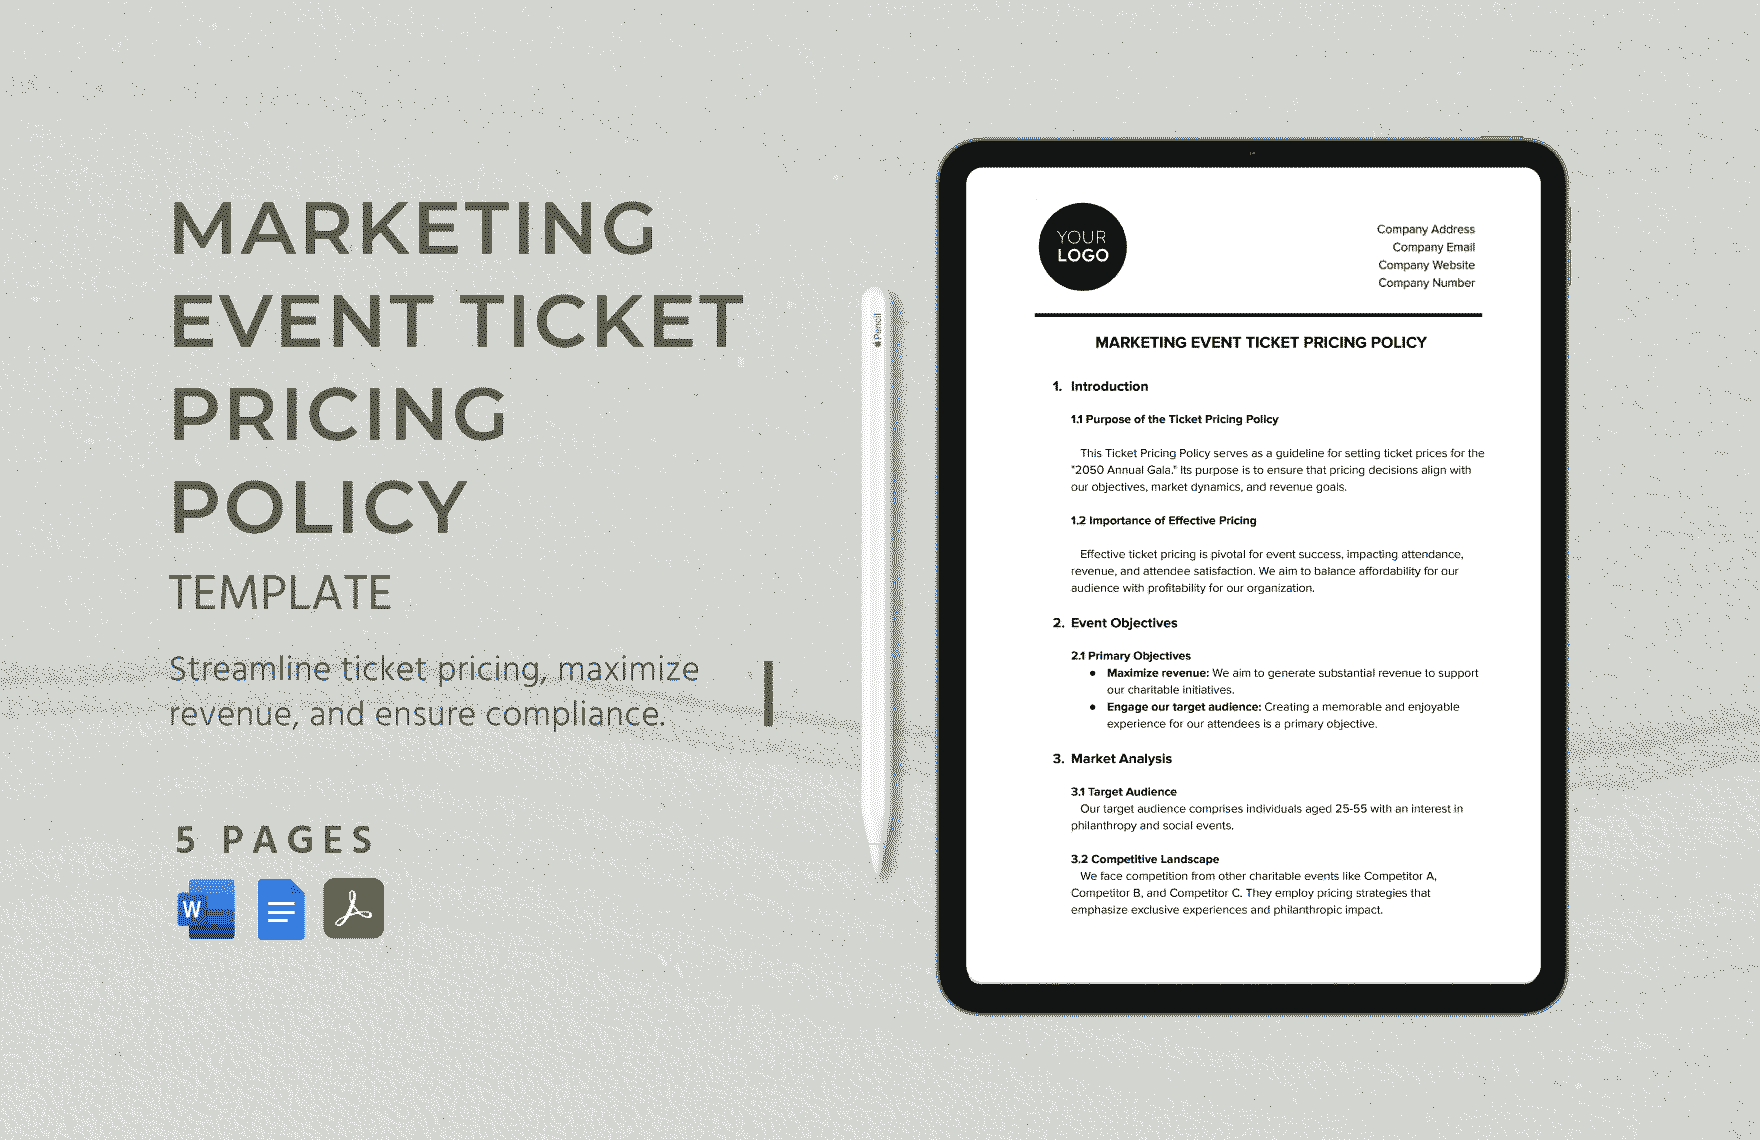 Marketing Event Ticket Pricing Policy Template in Word, Google Docs, PDF